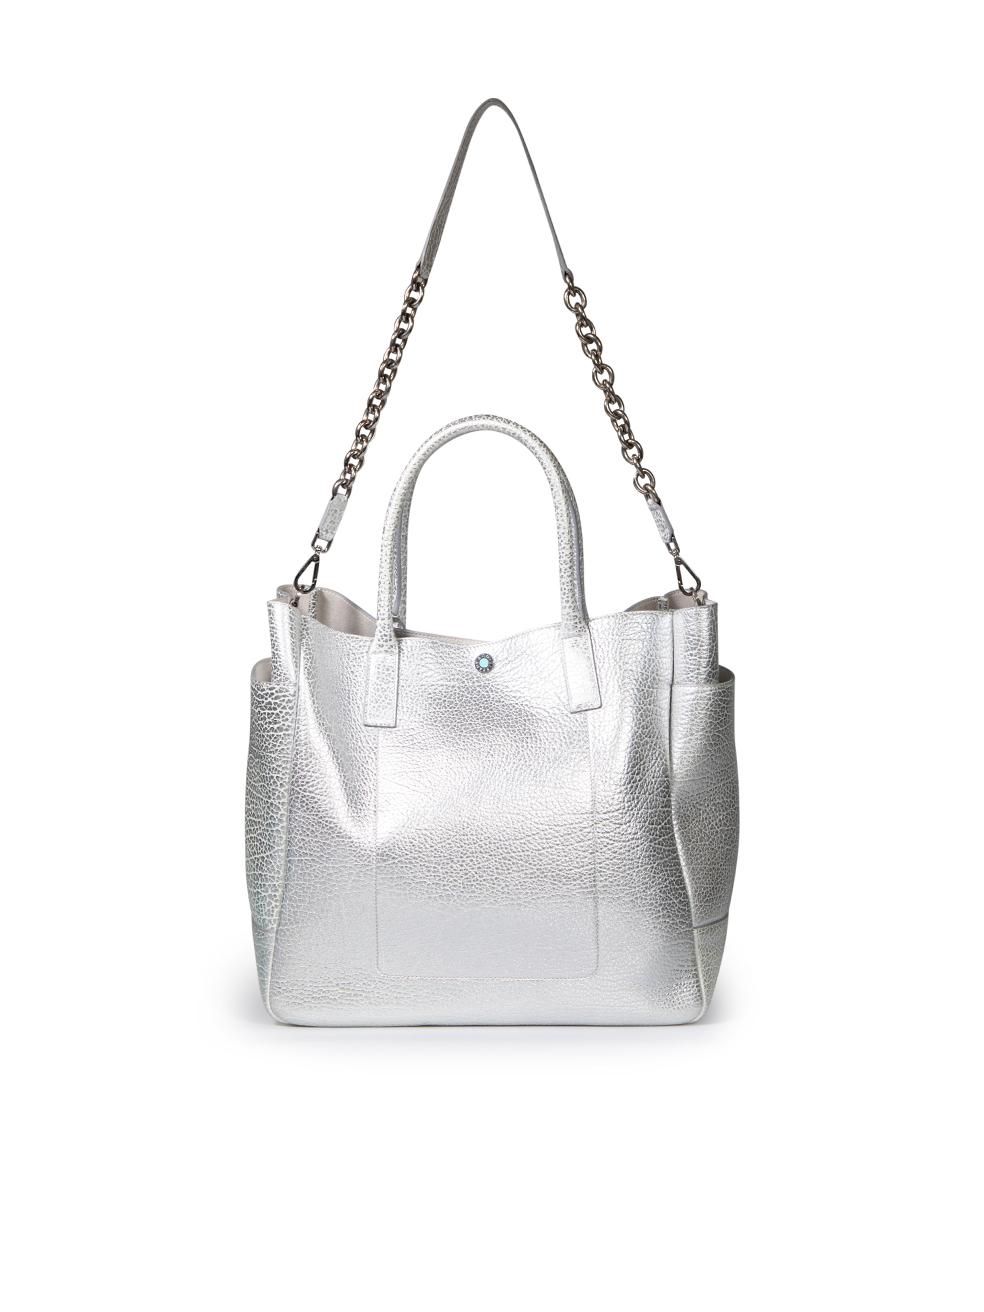 Tiffany & Co. Silver Leather Tote Bag In Good Condition For Sale In London, GB